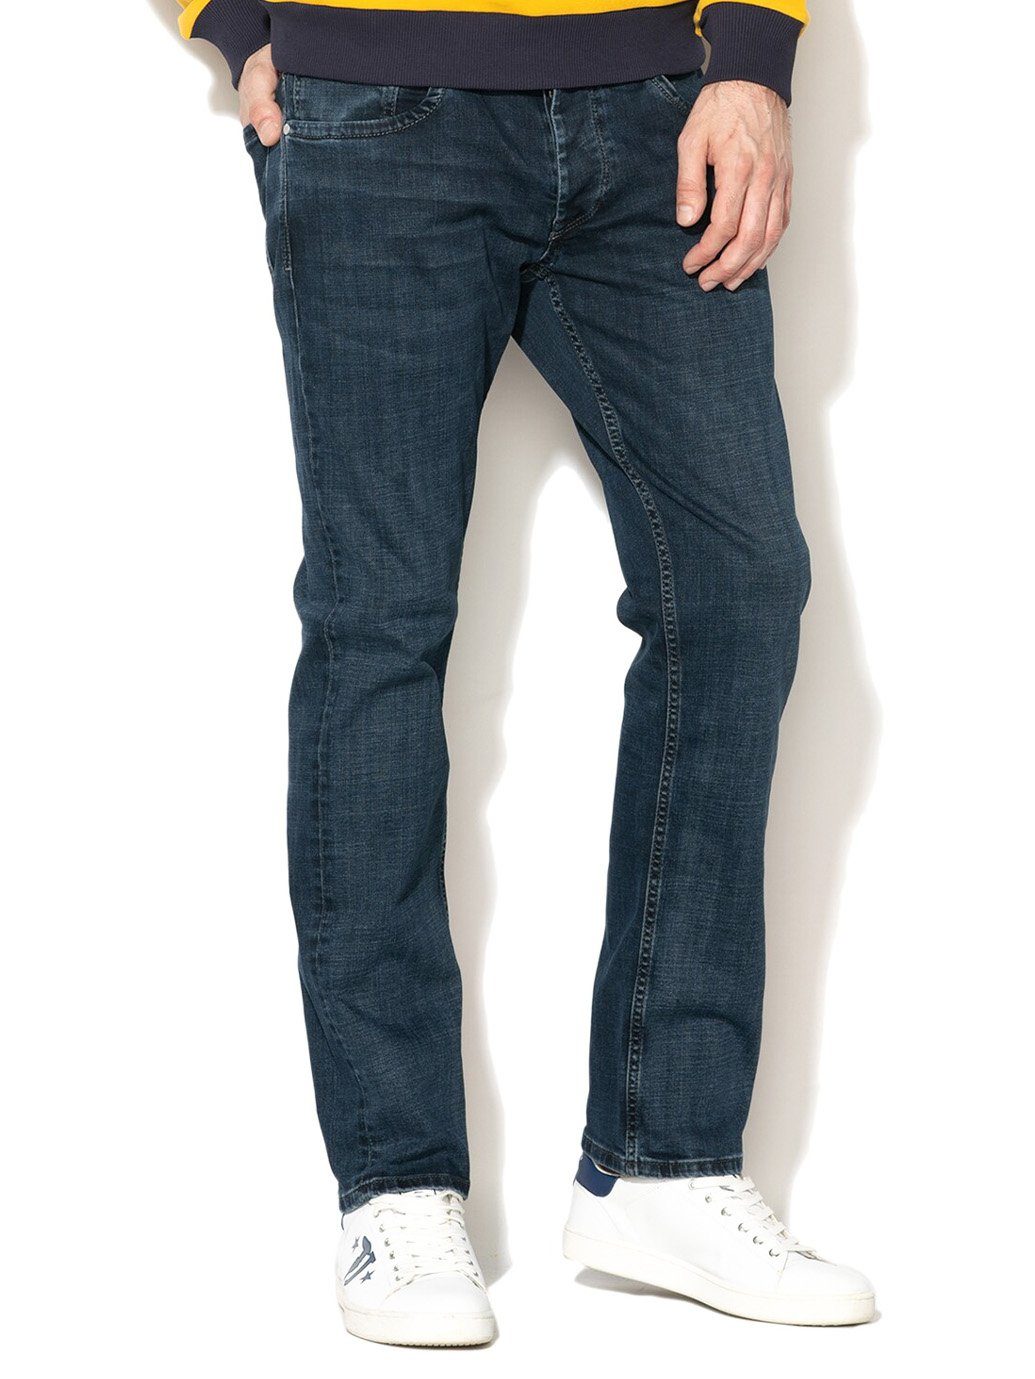 Pepe Jeans Straight-Jeans Herren Straight Stretch Hose - Cash WX7